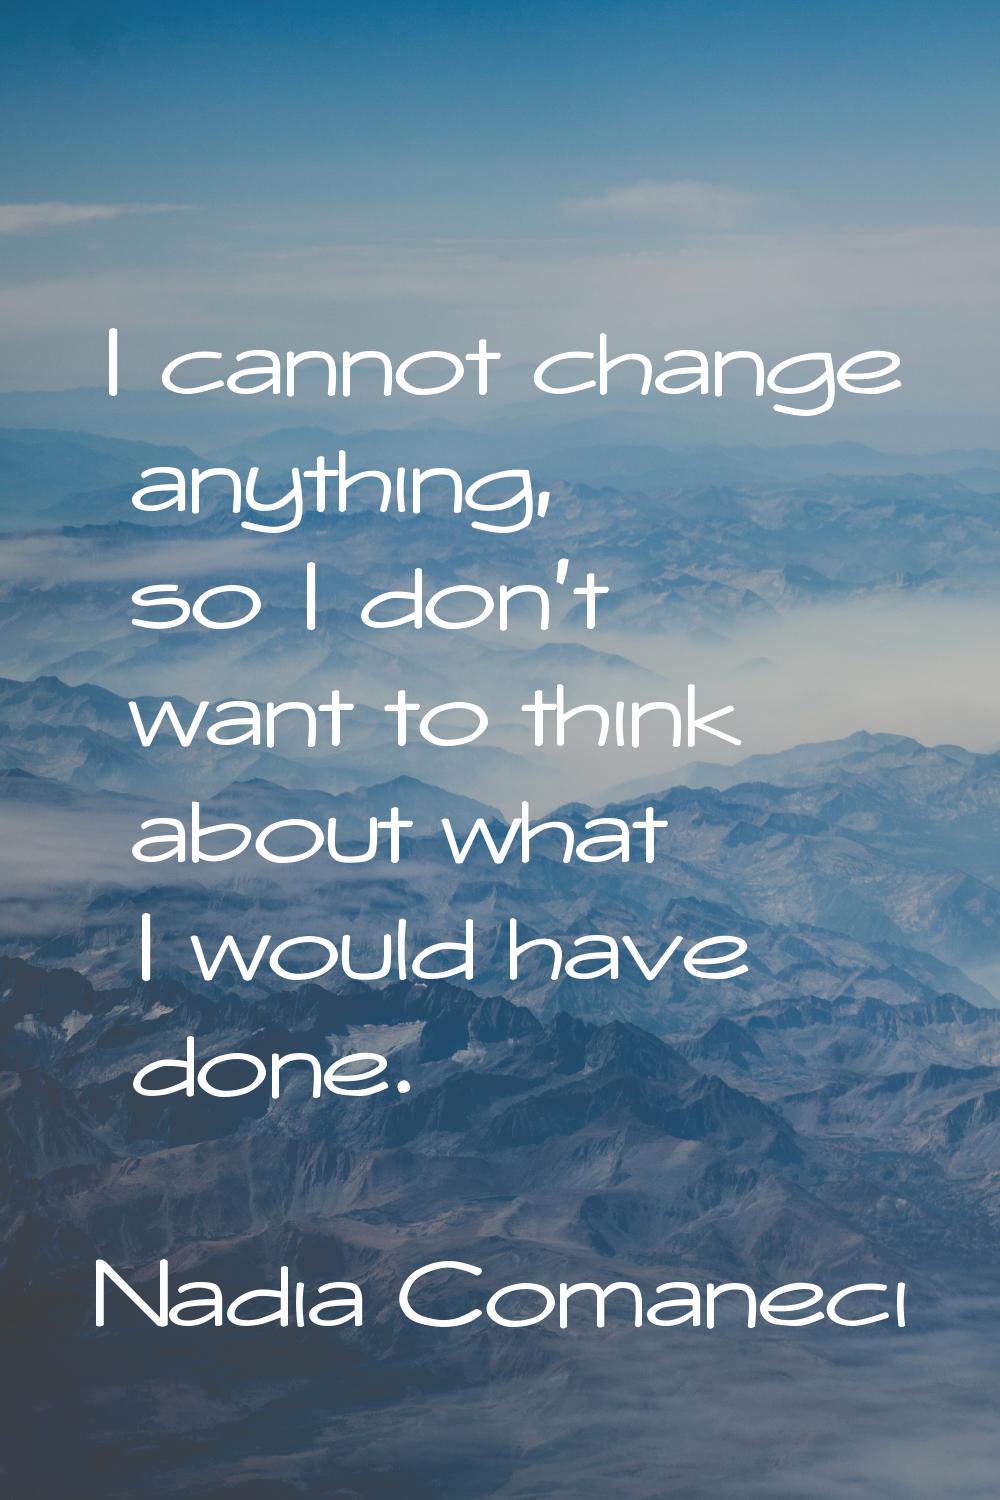 I cannot change anything, so I don't want to think about what I would have done.